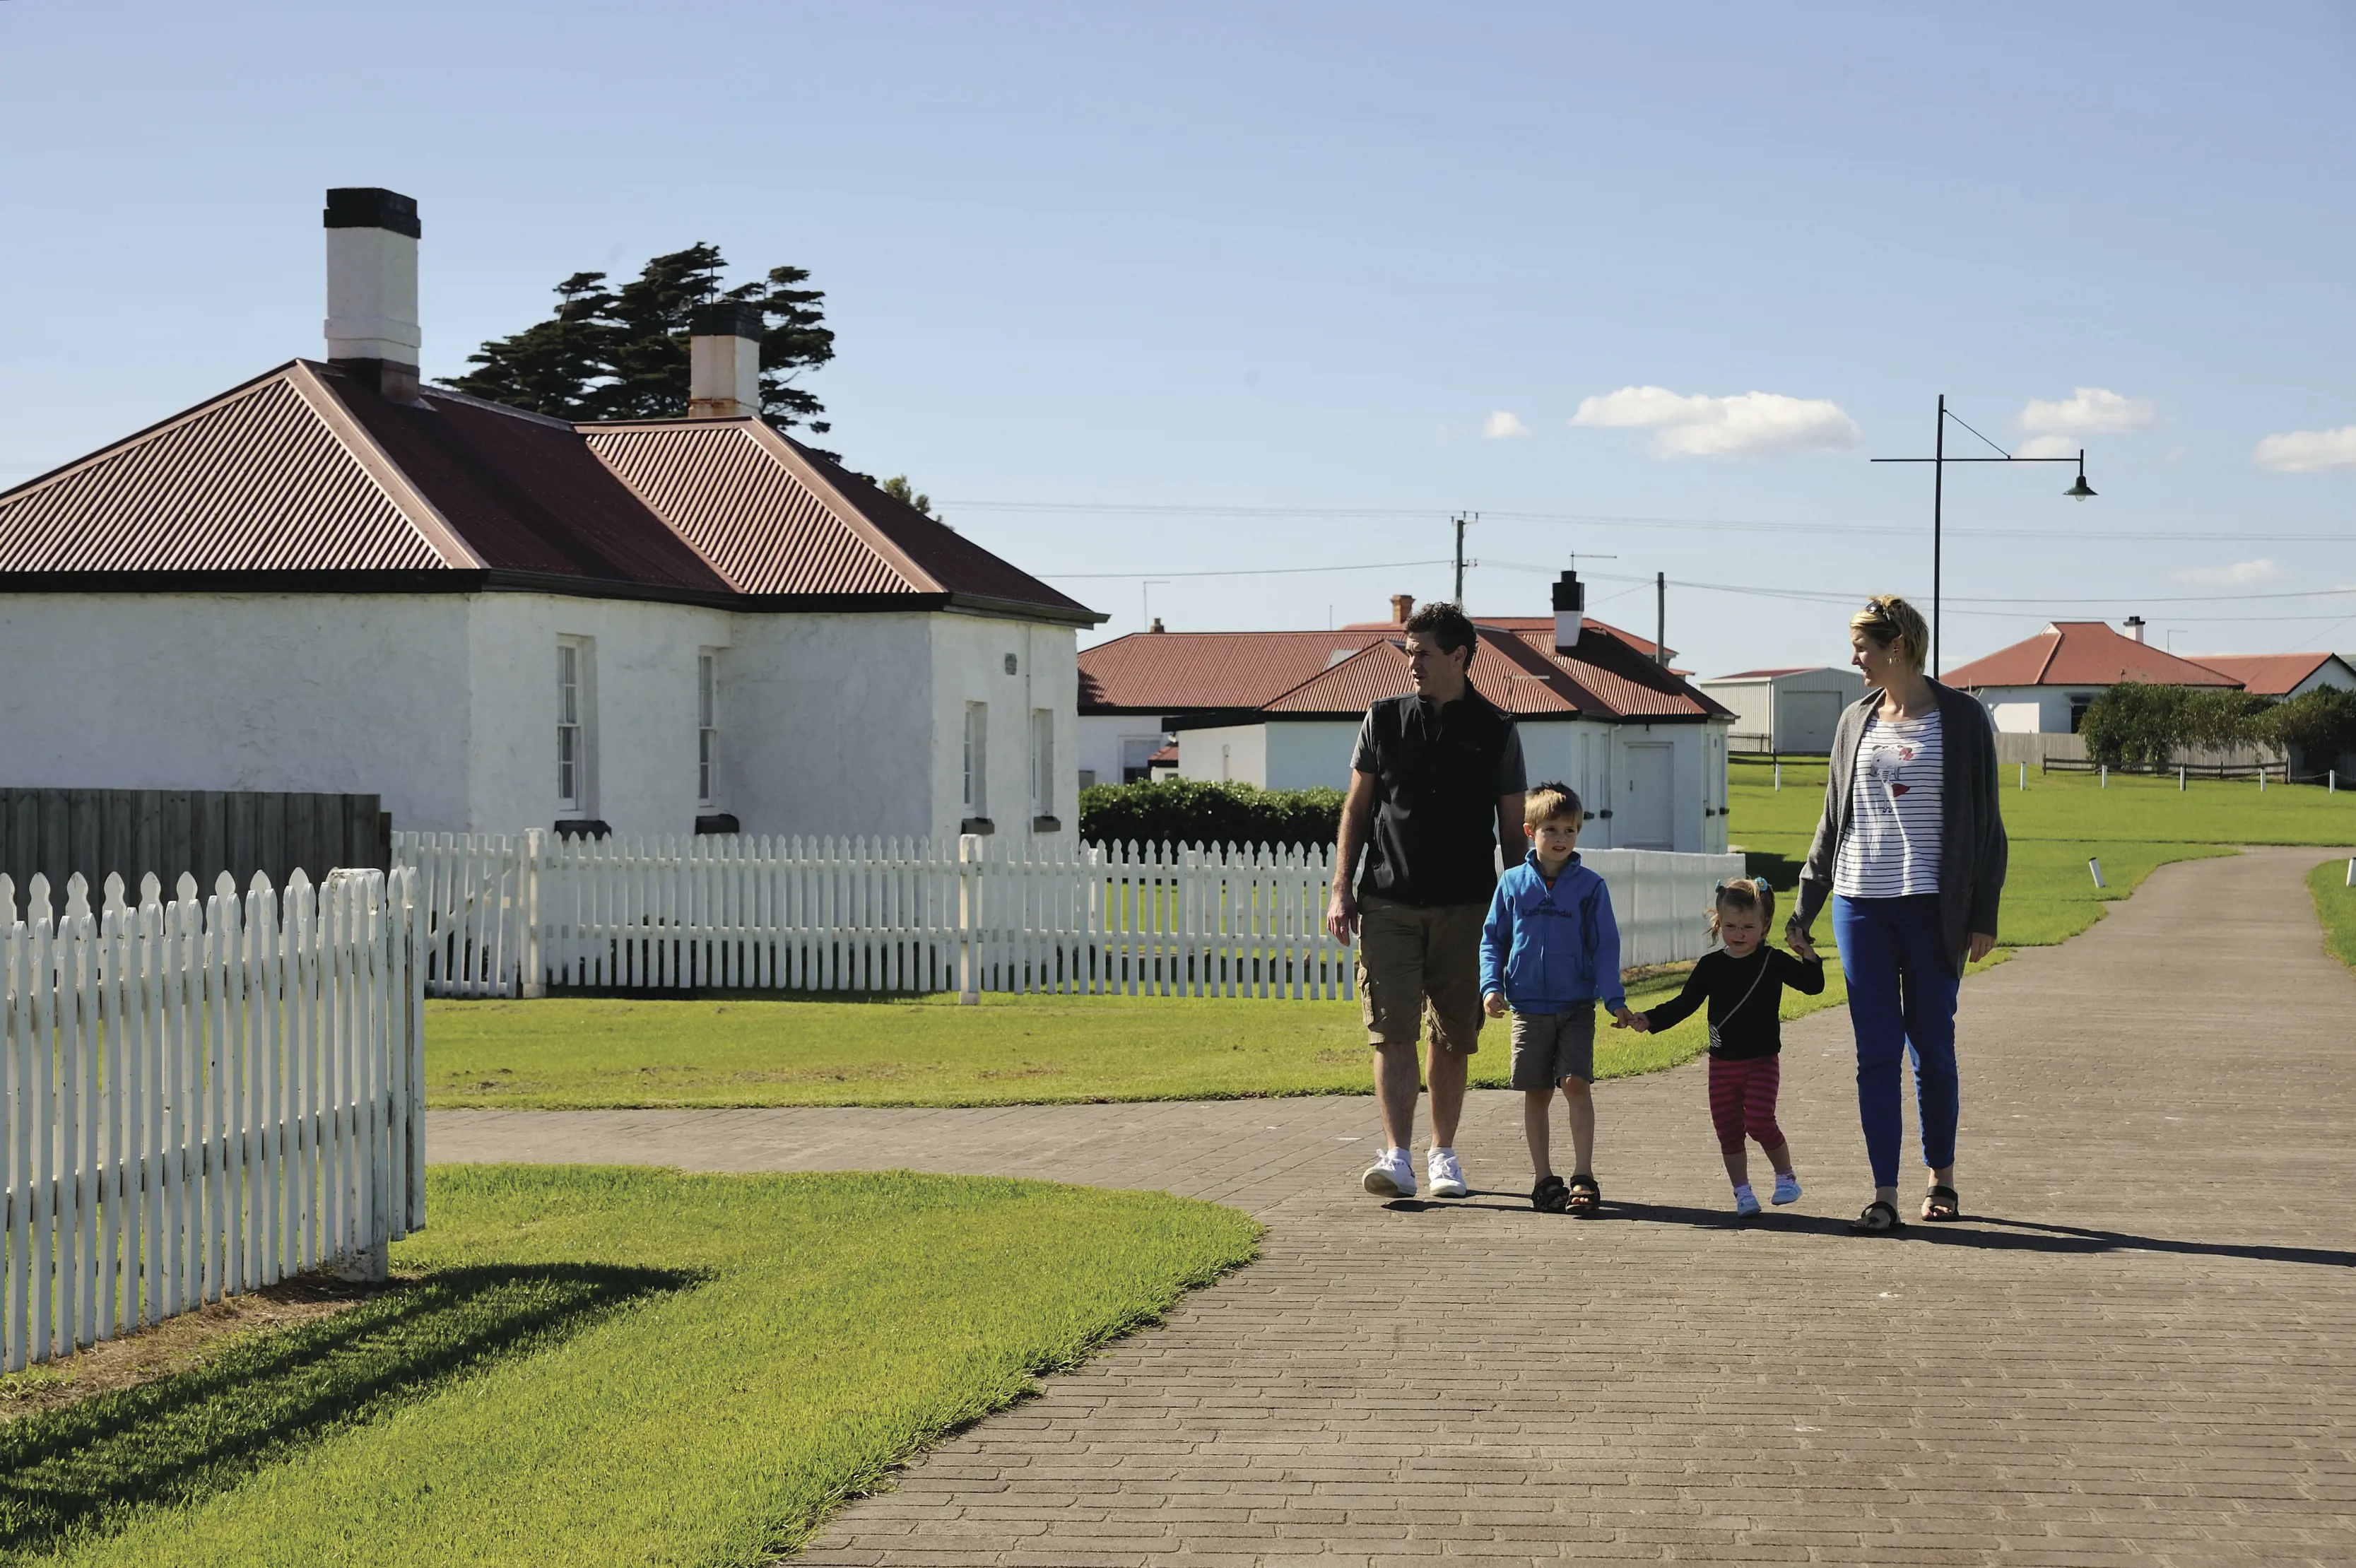 A family holding hands walk through the grounds at Low Head Pilot Station.